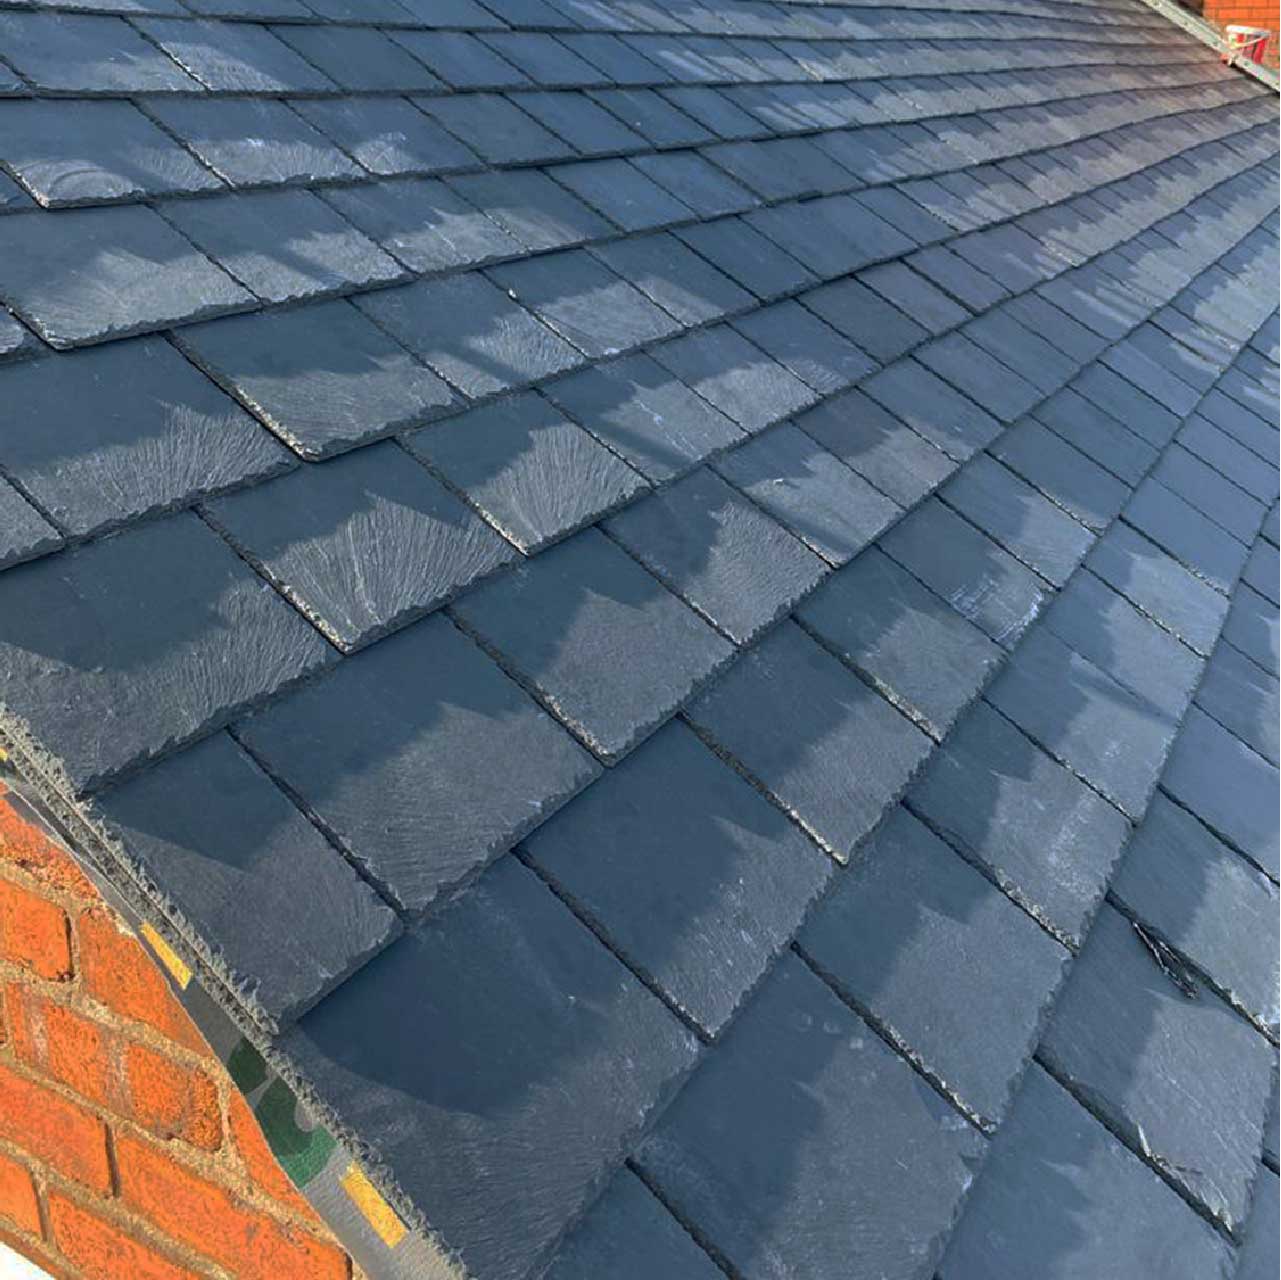 Madog Grey roofing slate on a roof, close up to show slates in detail.